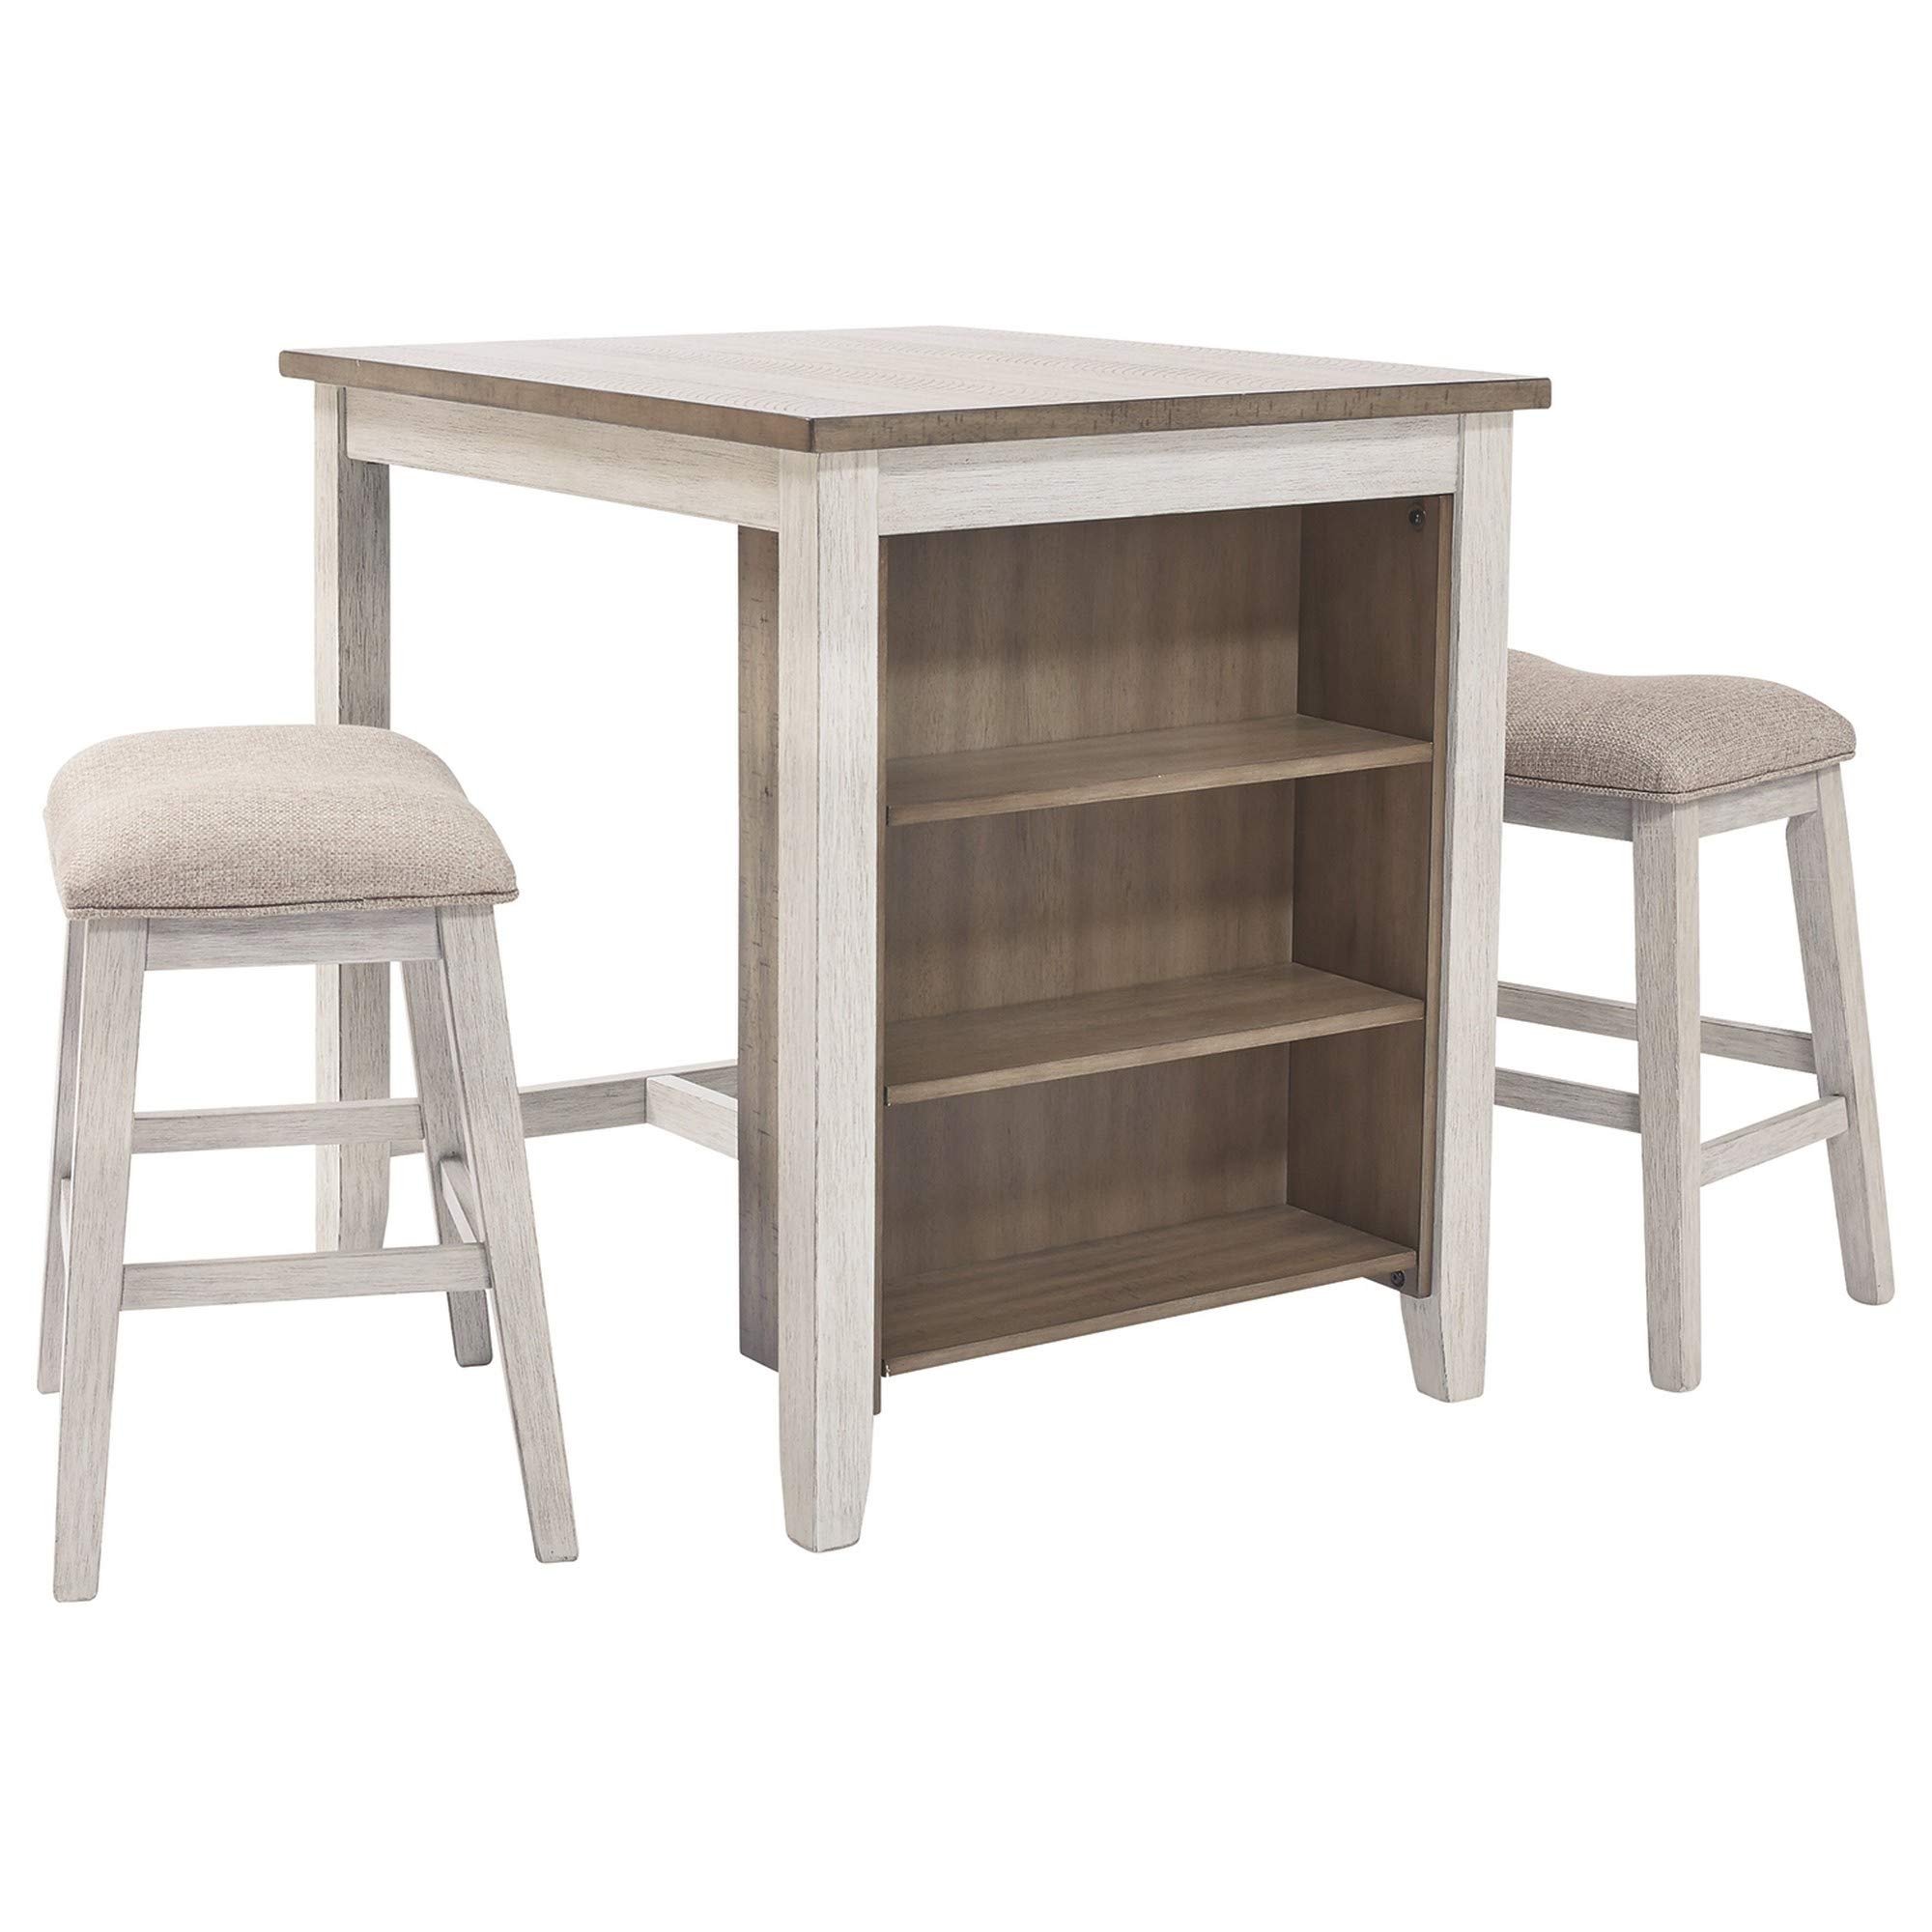 Benjara 3 Piece Counter Height Table And Barstool Set, White, Brown